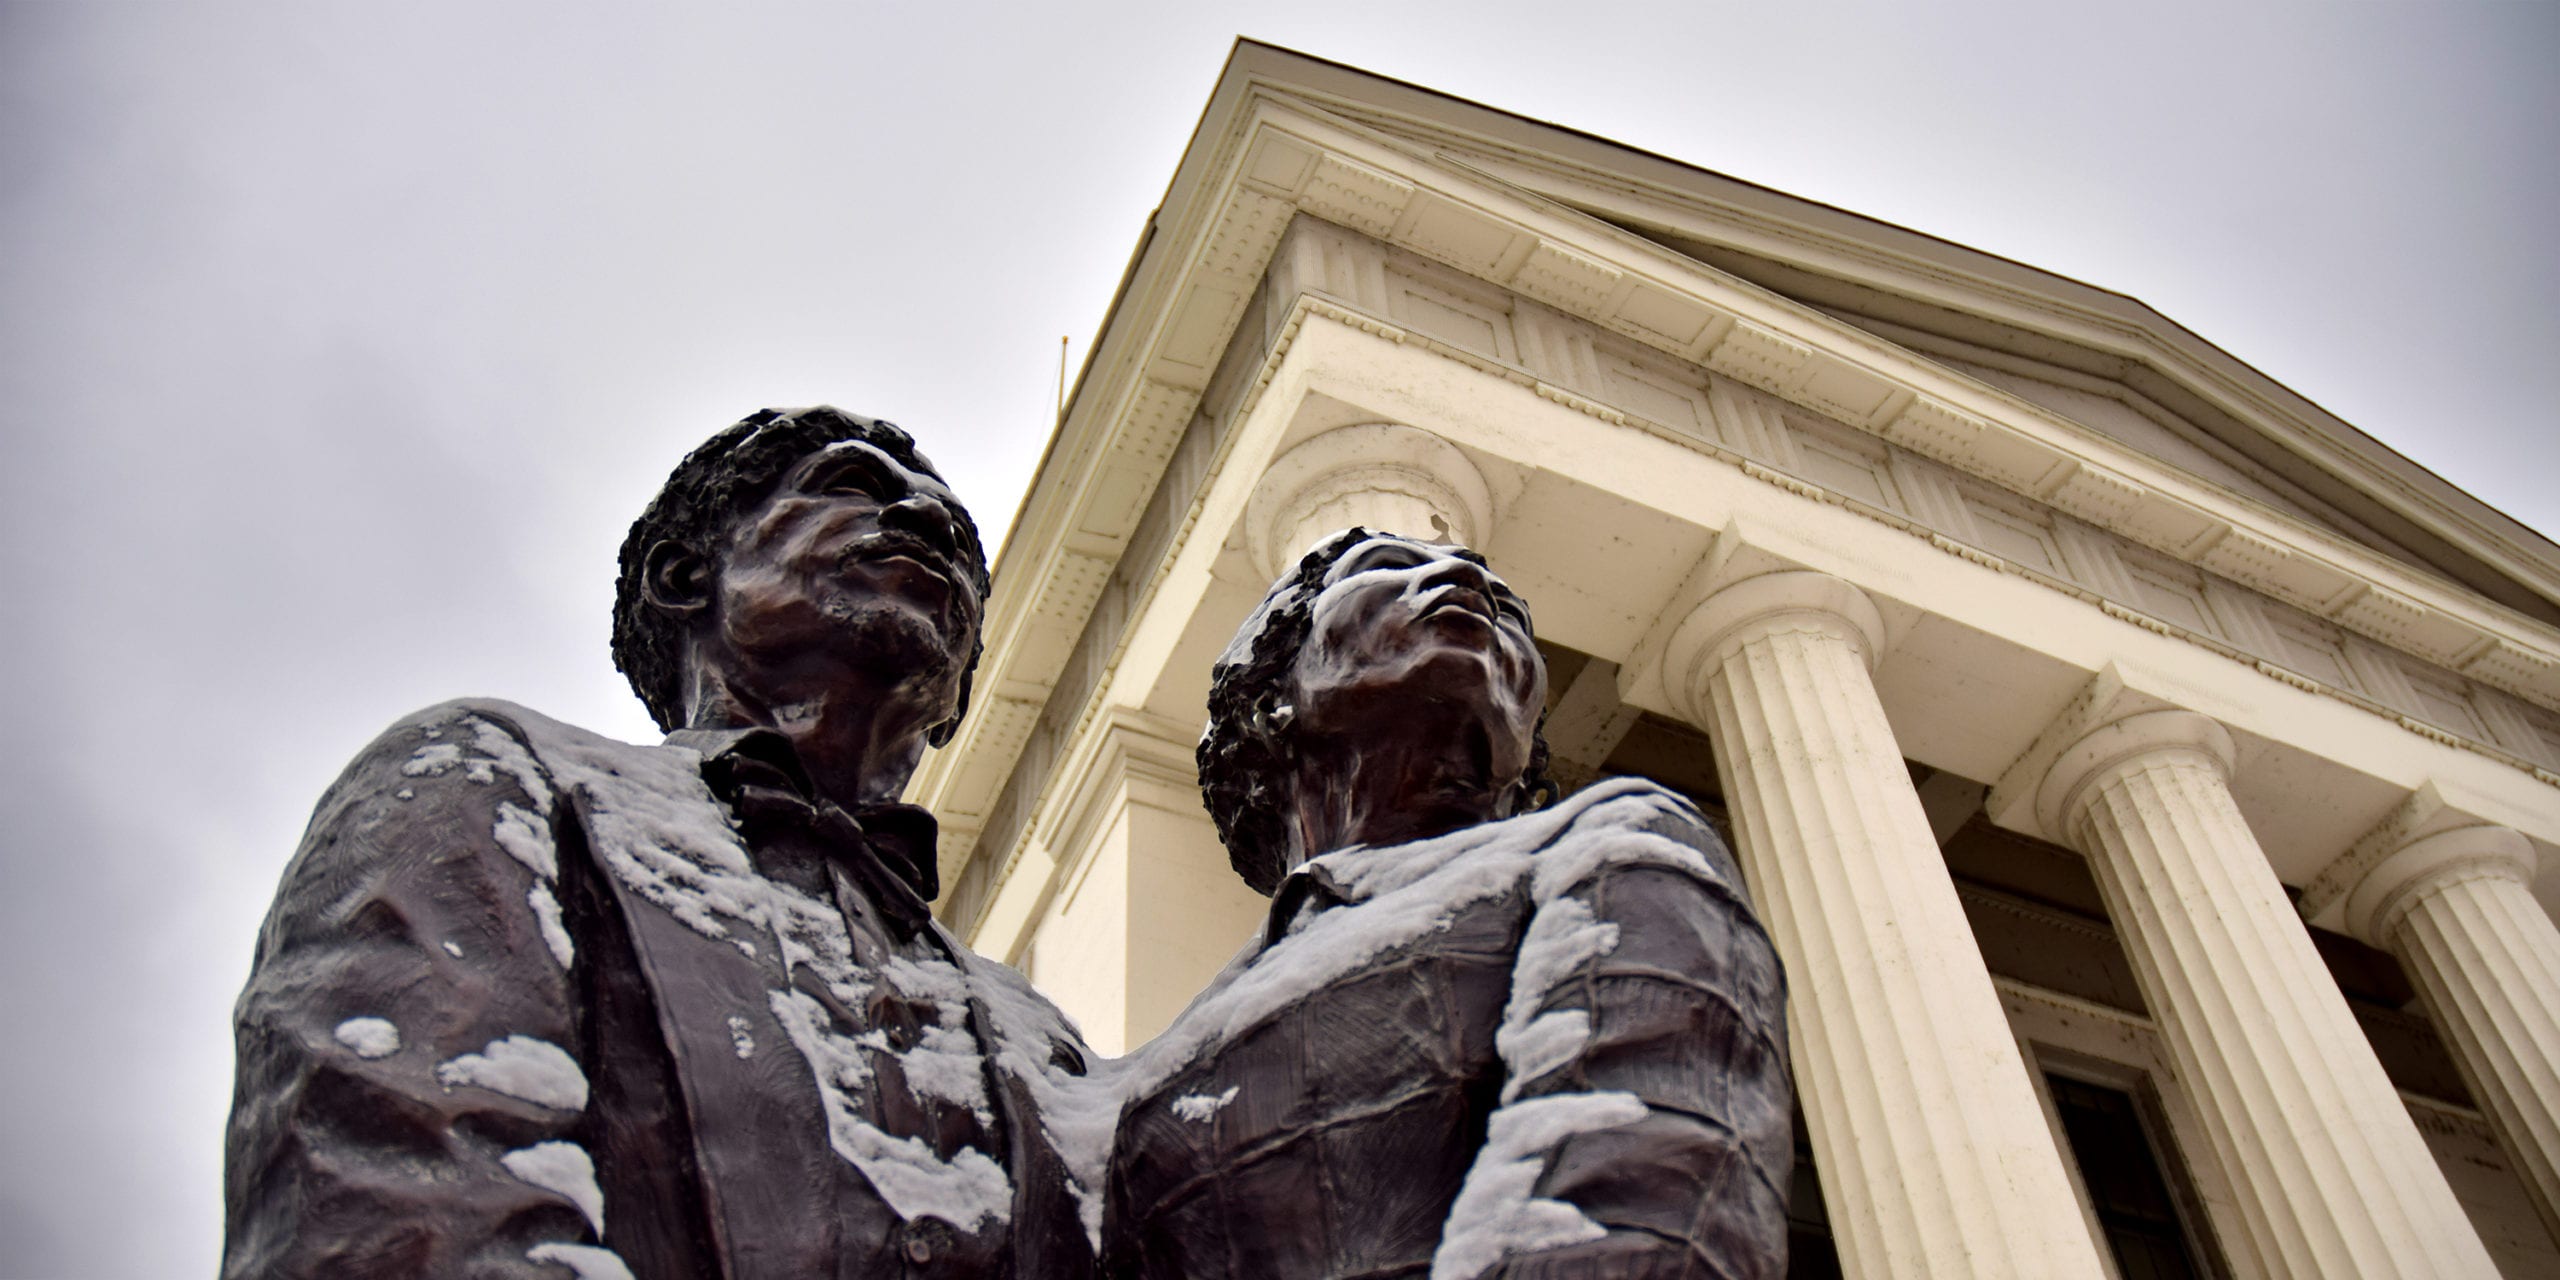 A bronze statue of Dred and Harriet Scott at the Old Courthouse in St. Louis.